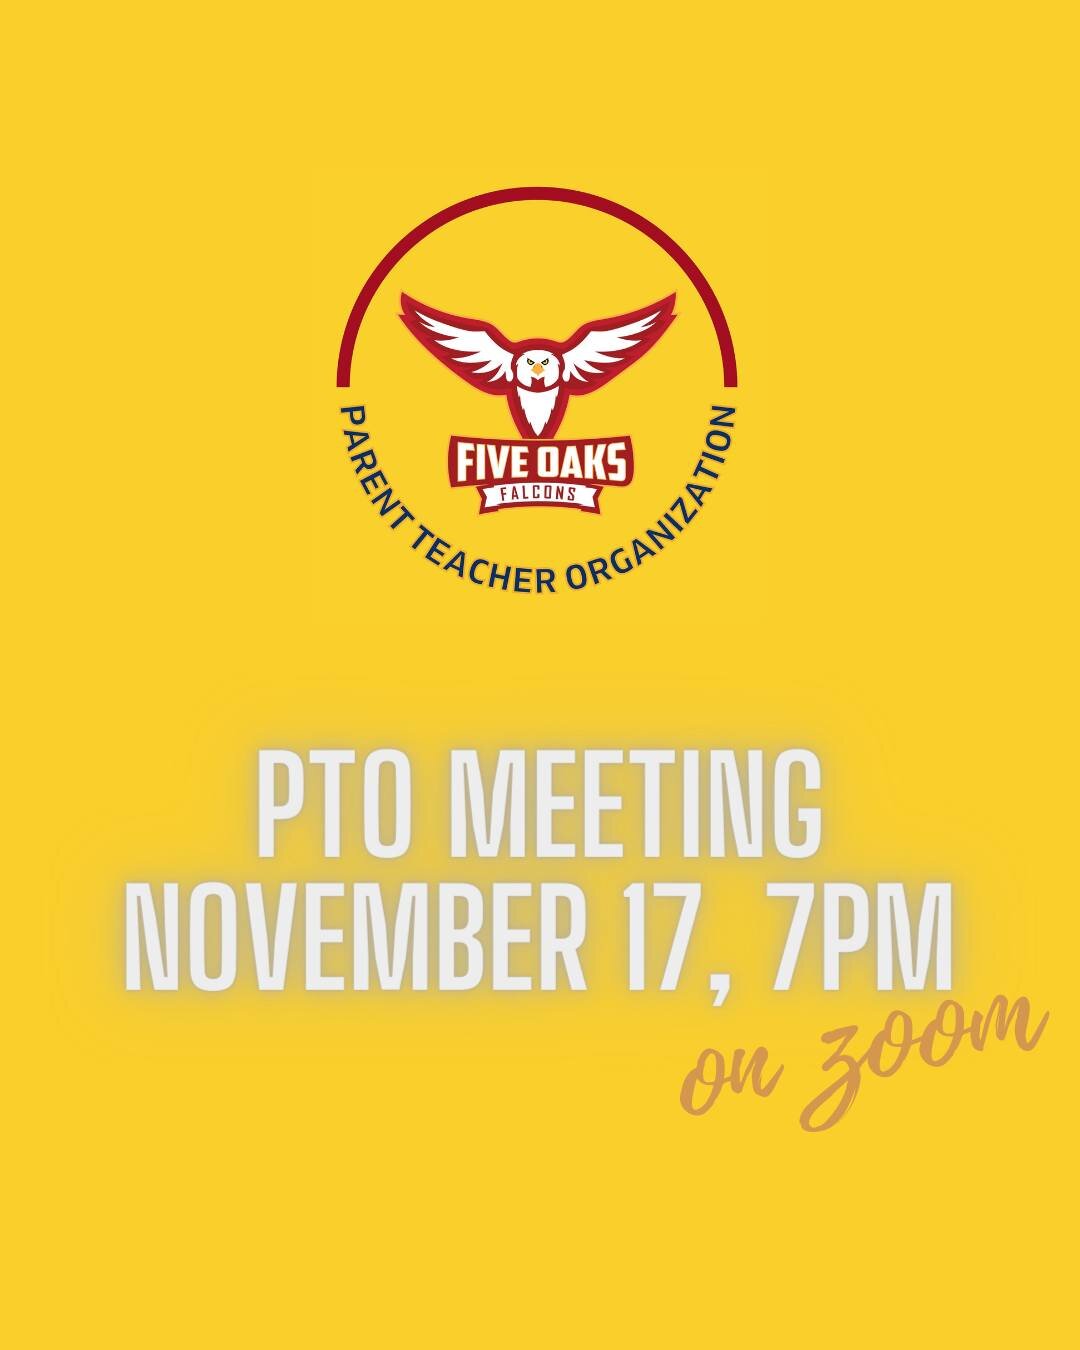 Join us this Thursday for our November PTO Meeting. This month we will have two guest speakers: Kelly Laverne with the Principal's Report and Ruby Fuller, discussing internet safety and social/emotional learning. 

Zoom login details will be sent out